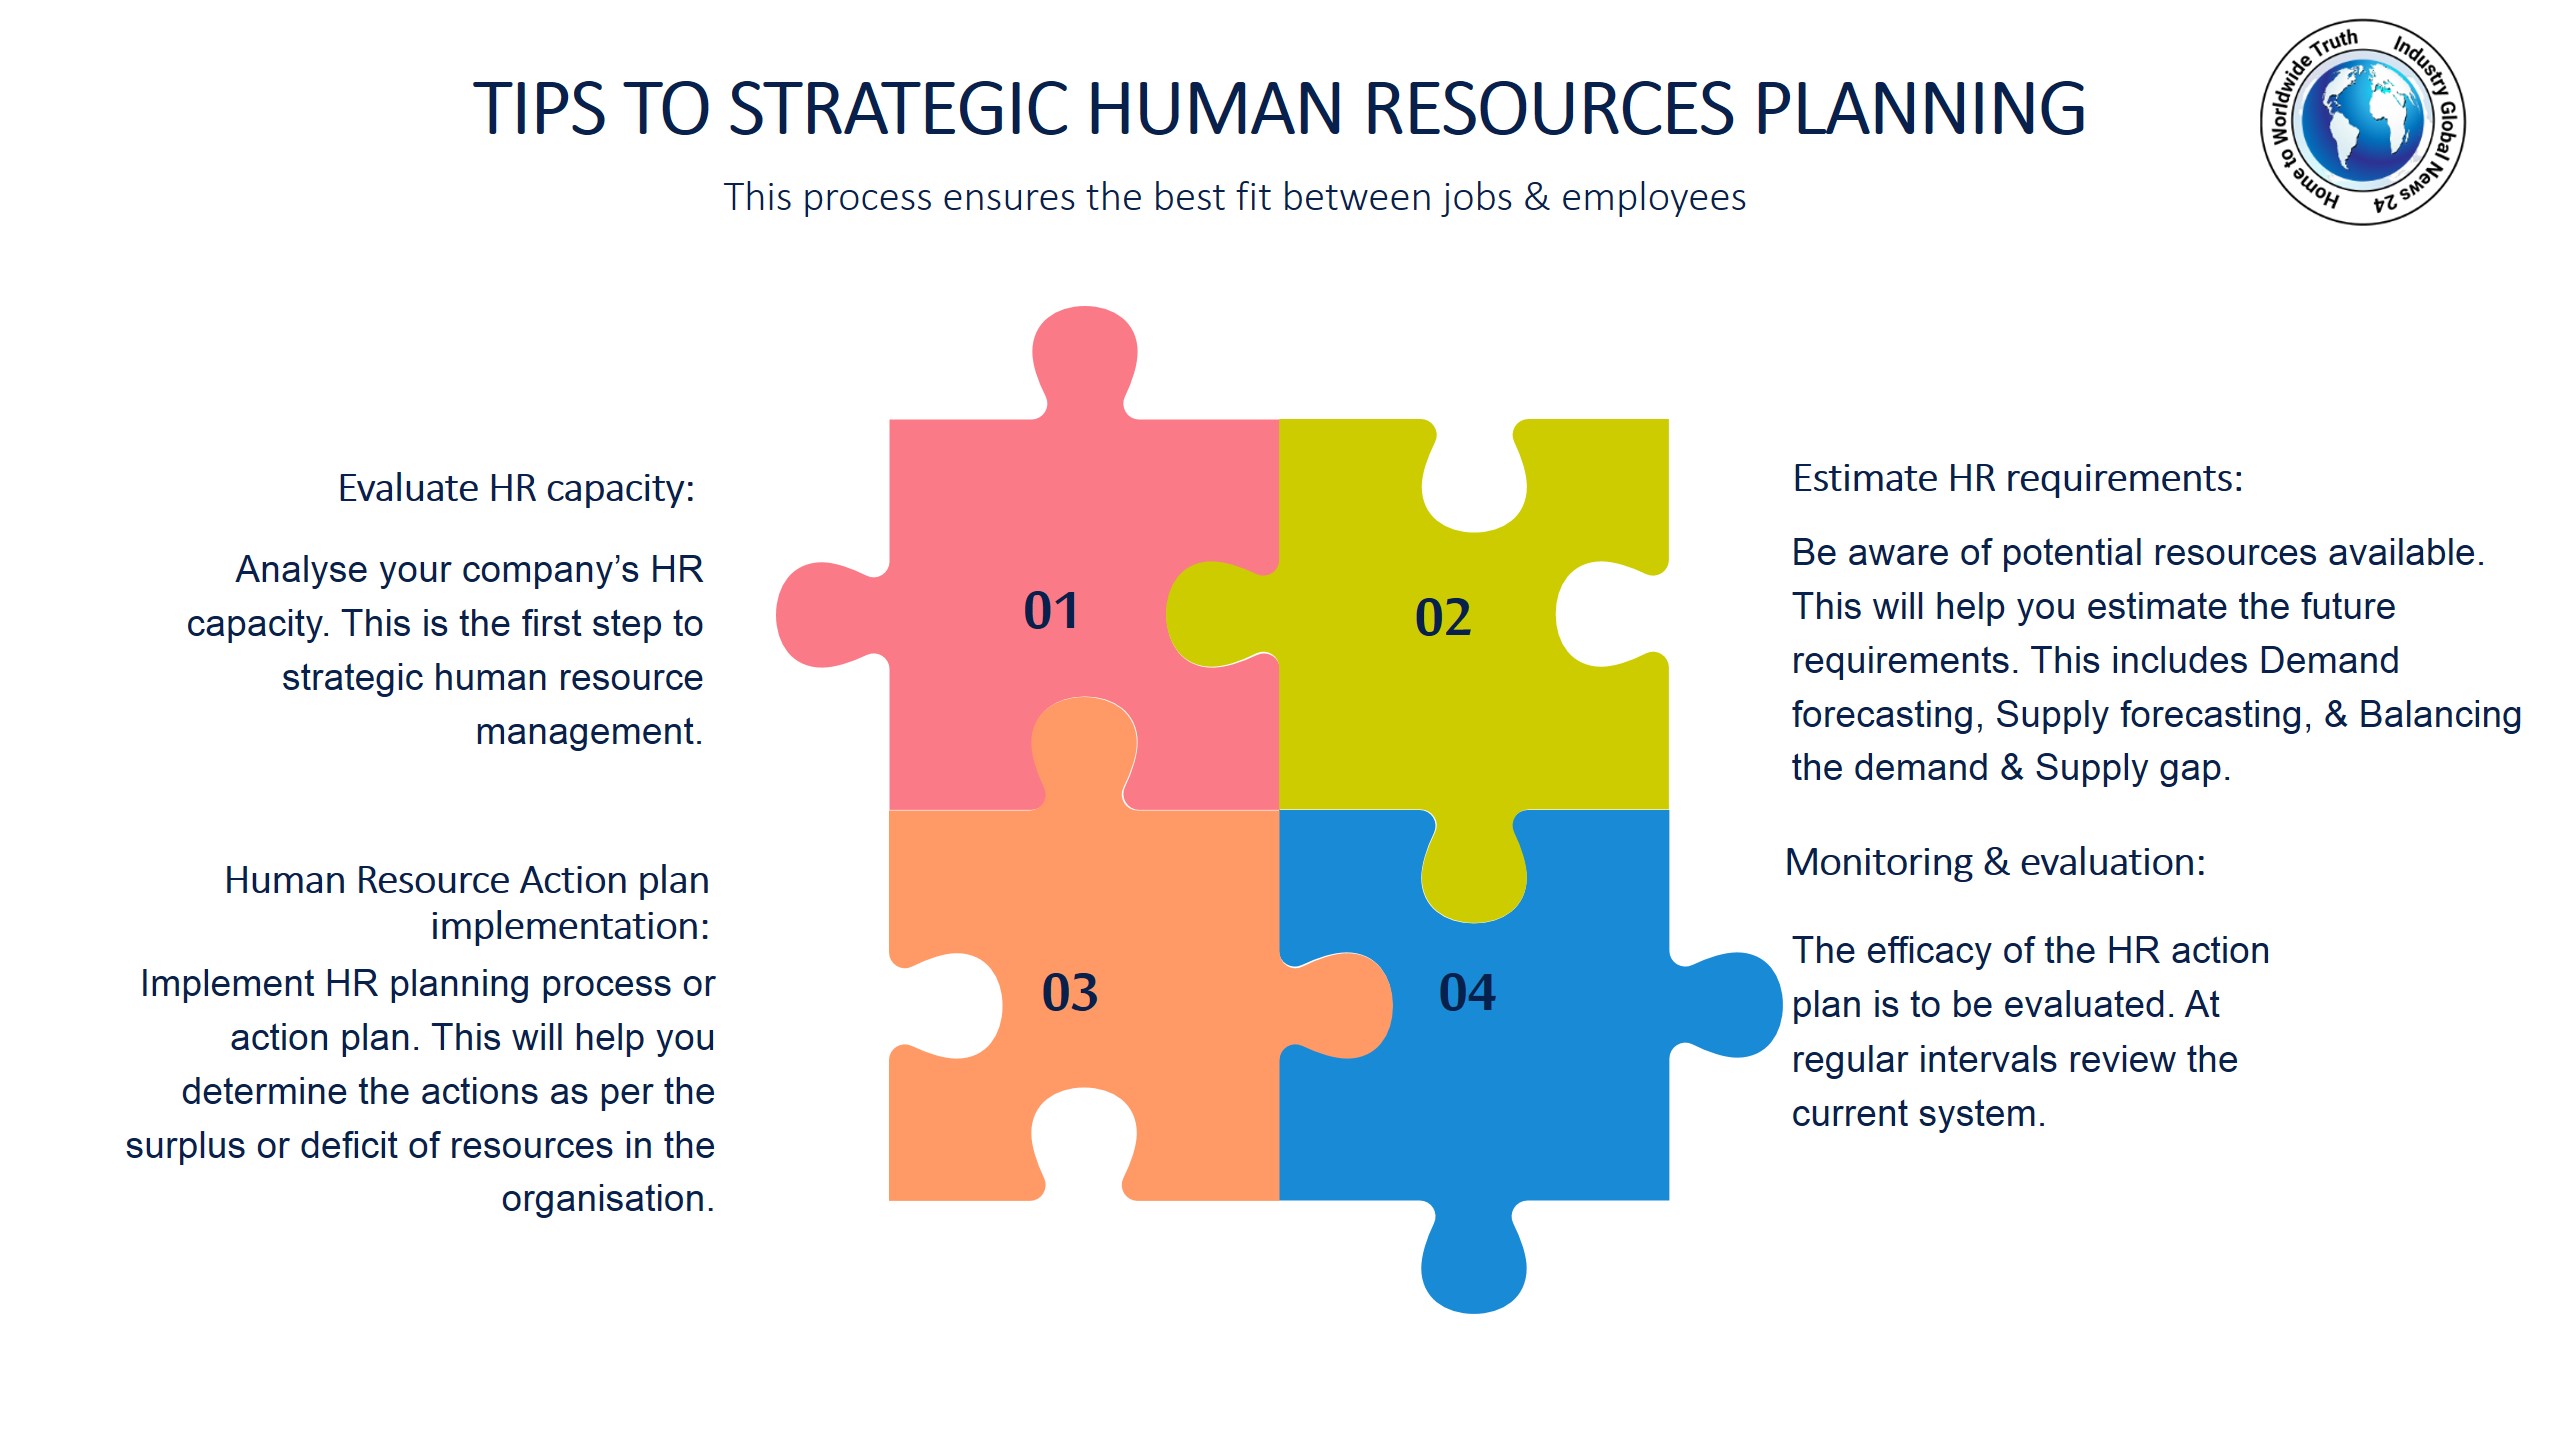 Tips to strategic human resources planning